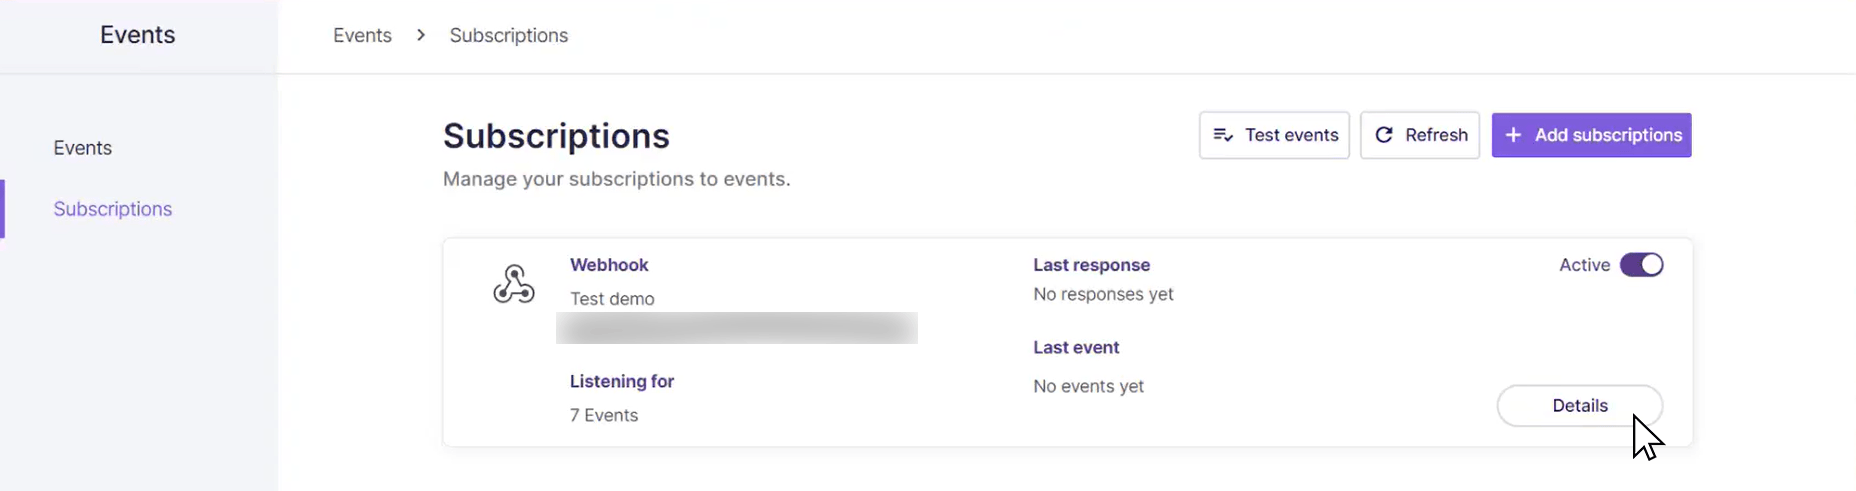 Events service - subscriptions page - manage click-to-zoom